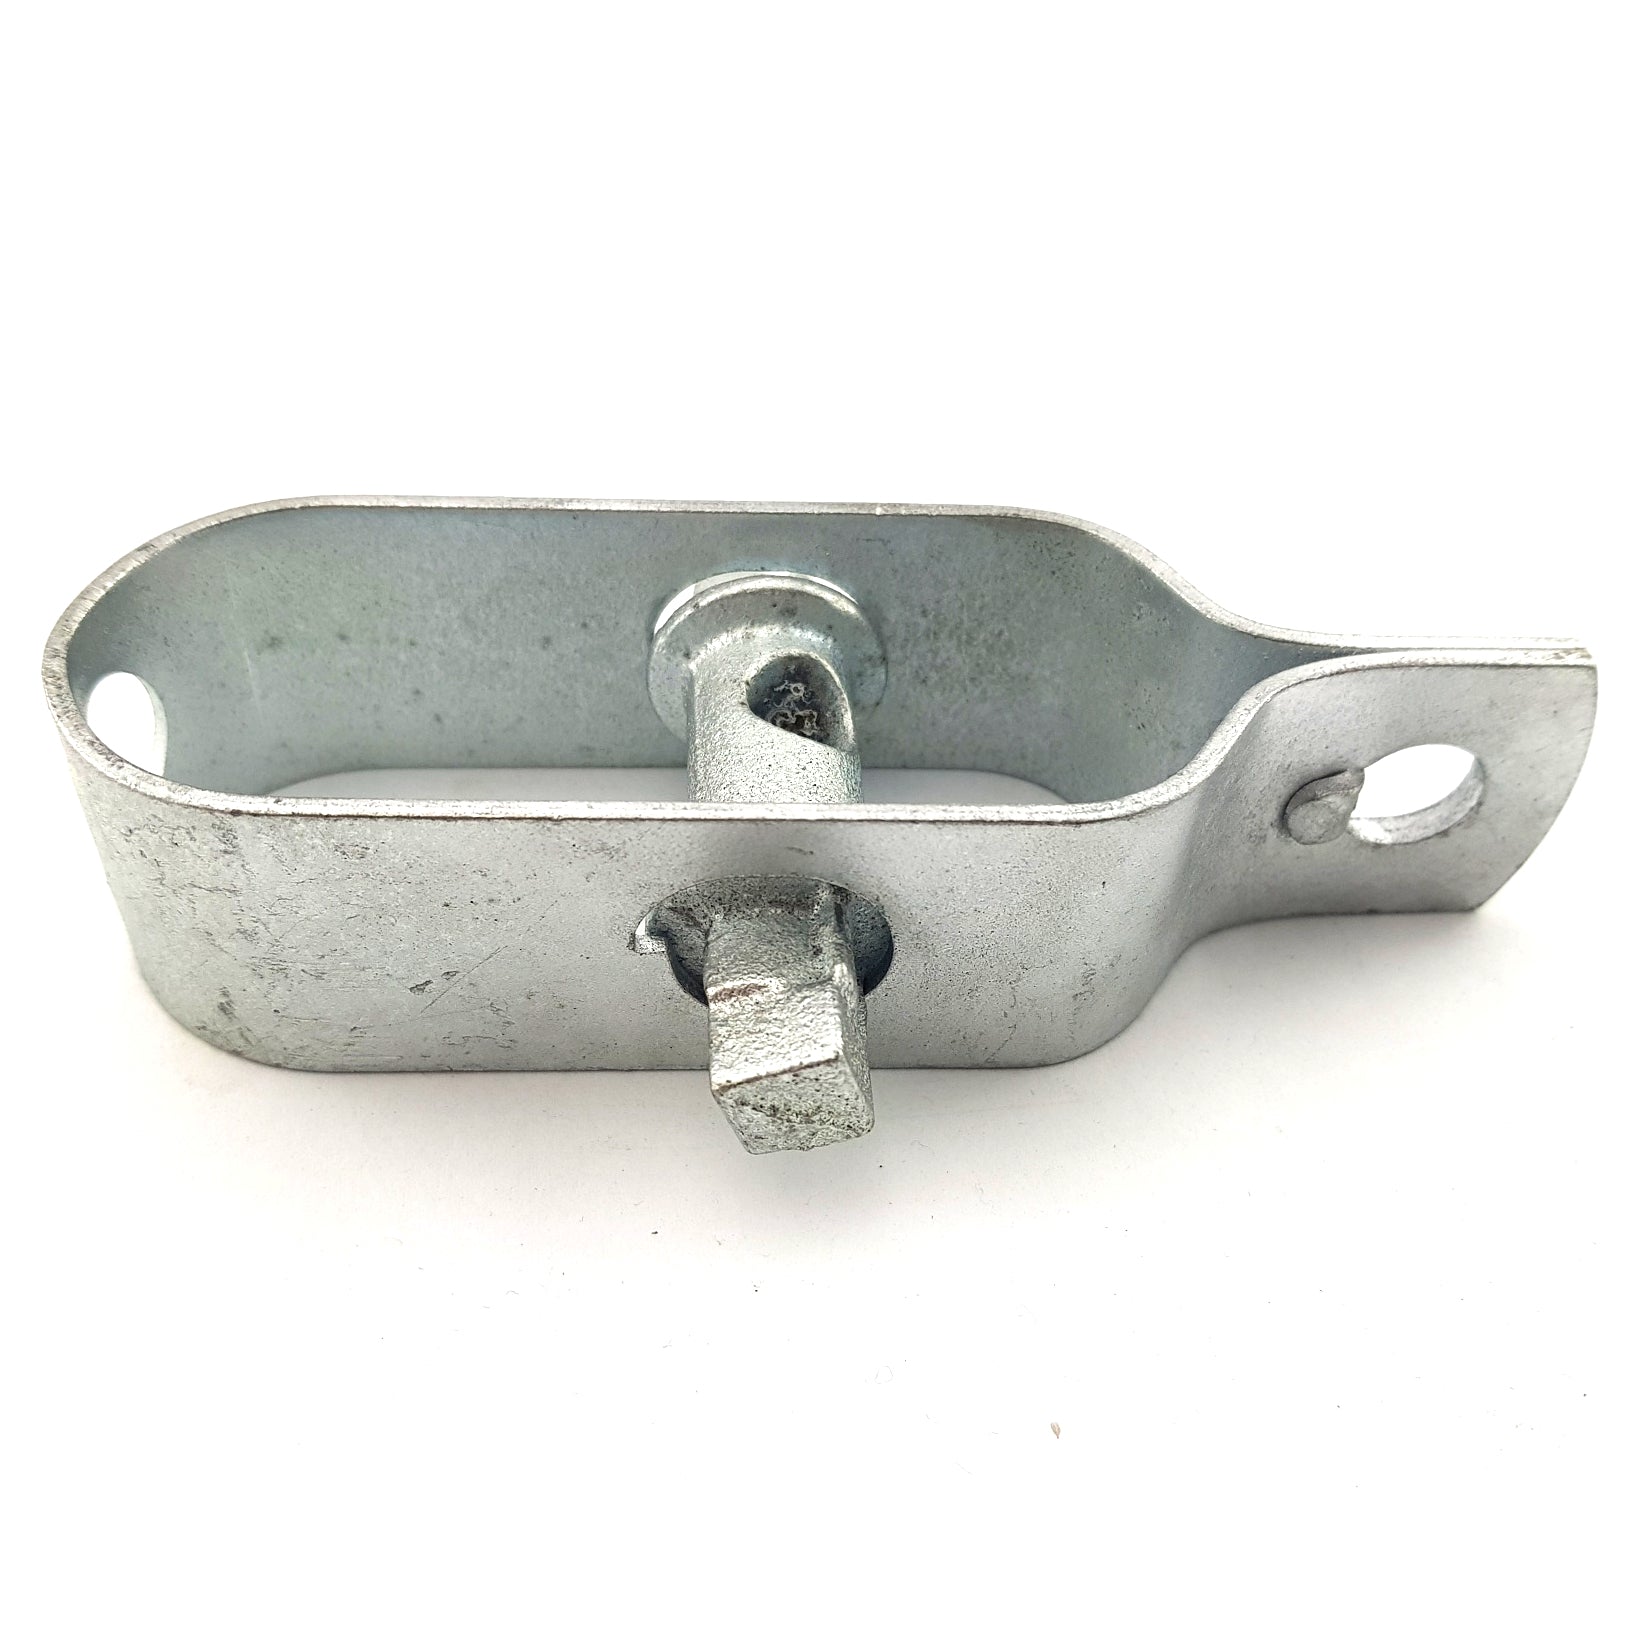 Galvanised wire tensioner. Balustrading Products. Melbourne, Australia. 